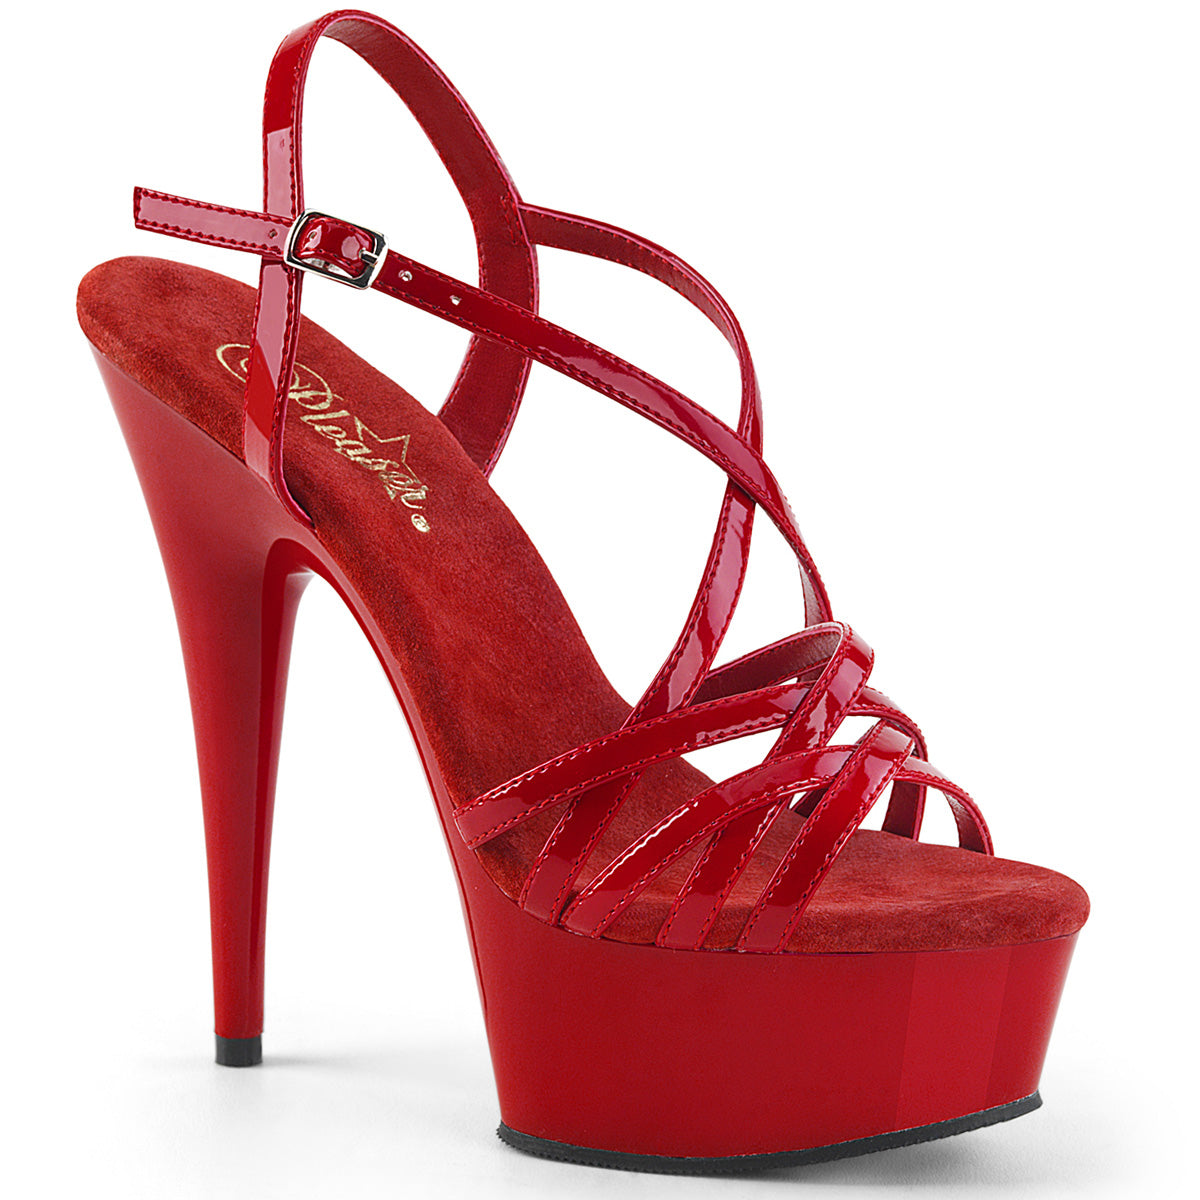 Pleaser Sandalias para mujer DELIGHT-613 Red Pat / Red